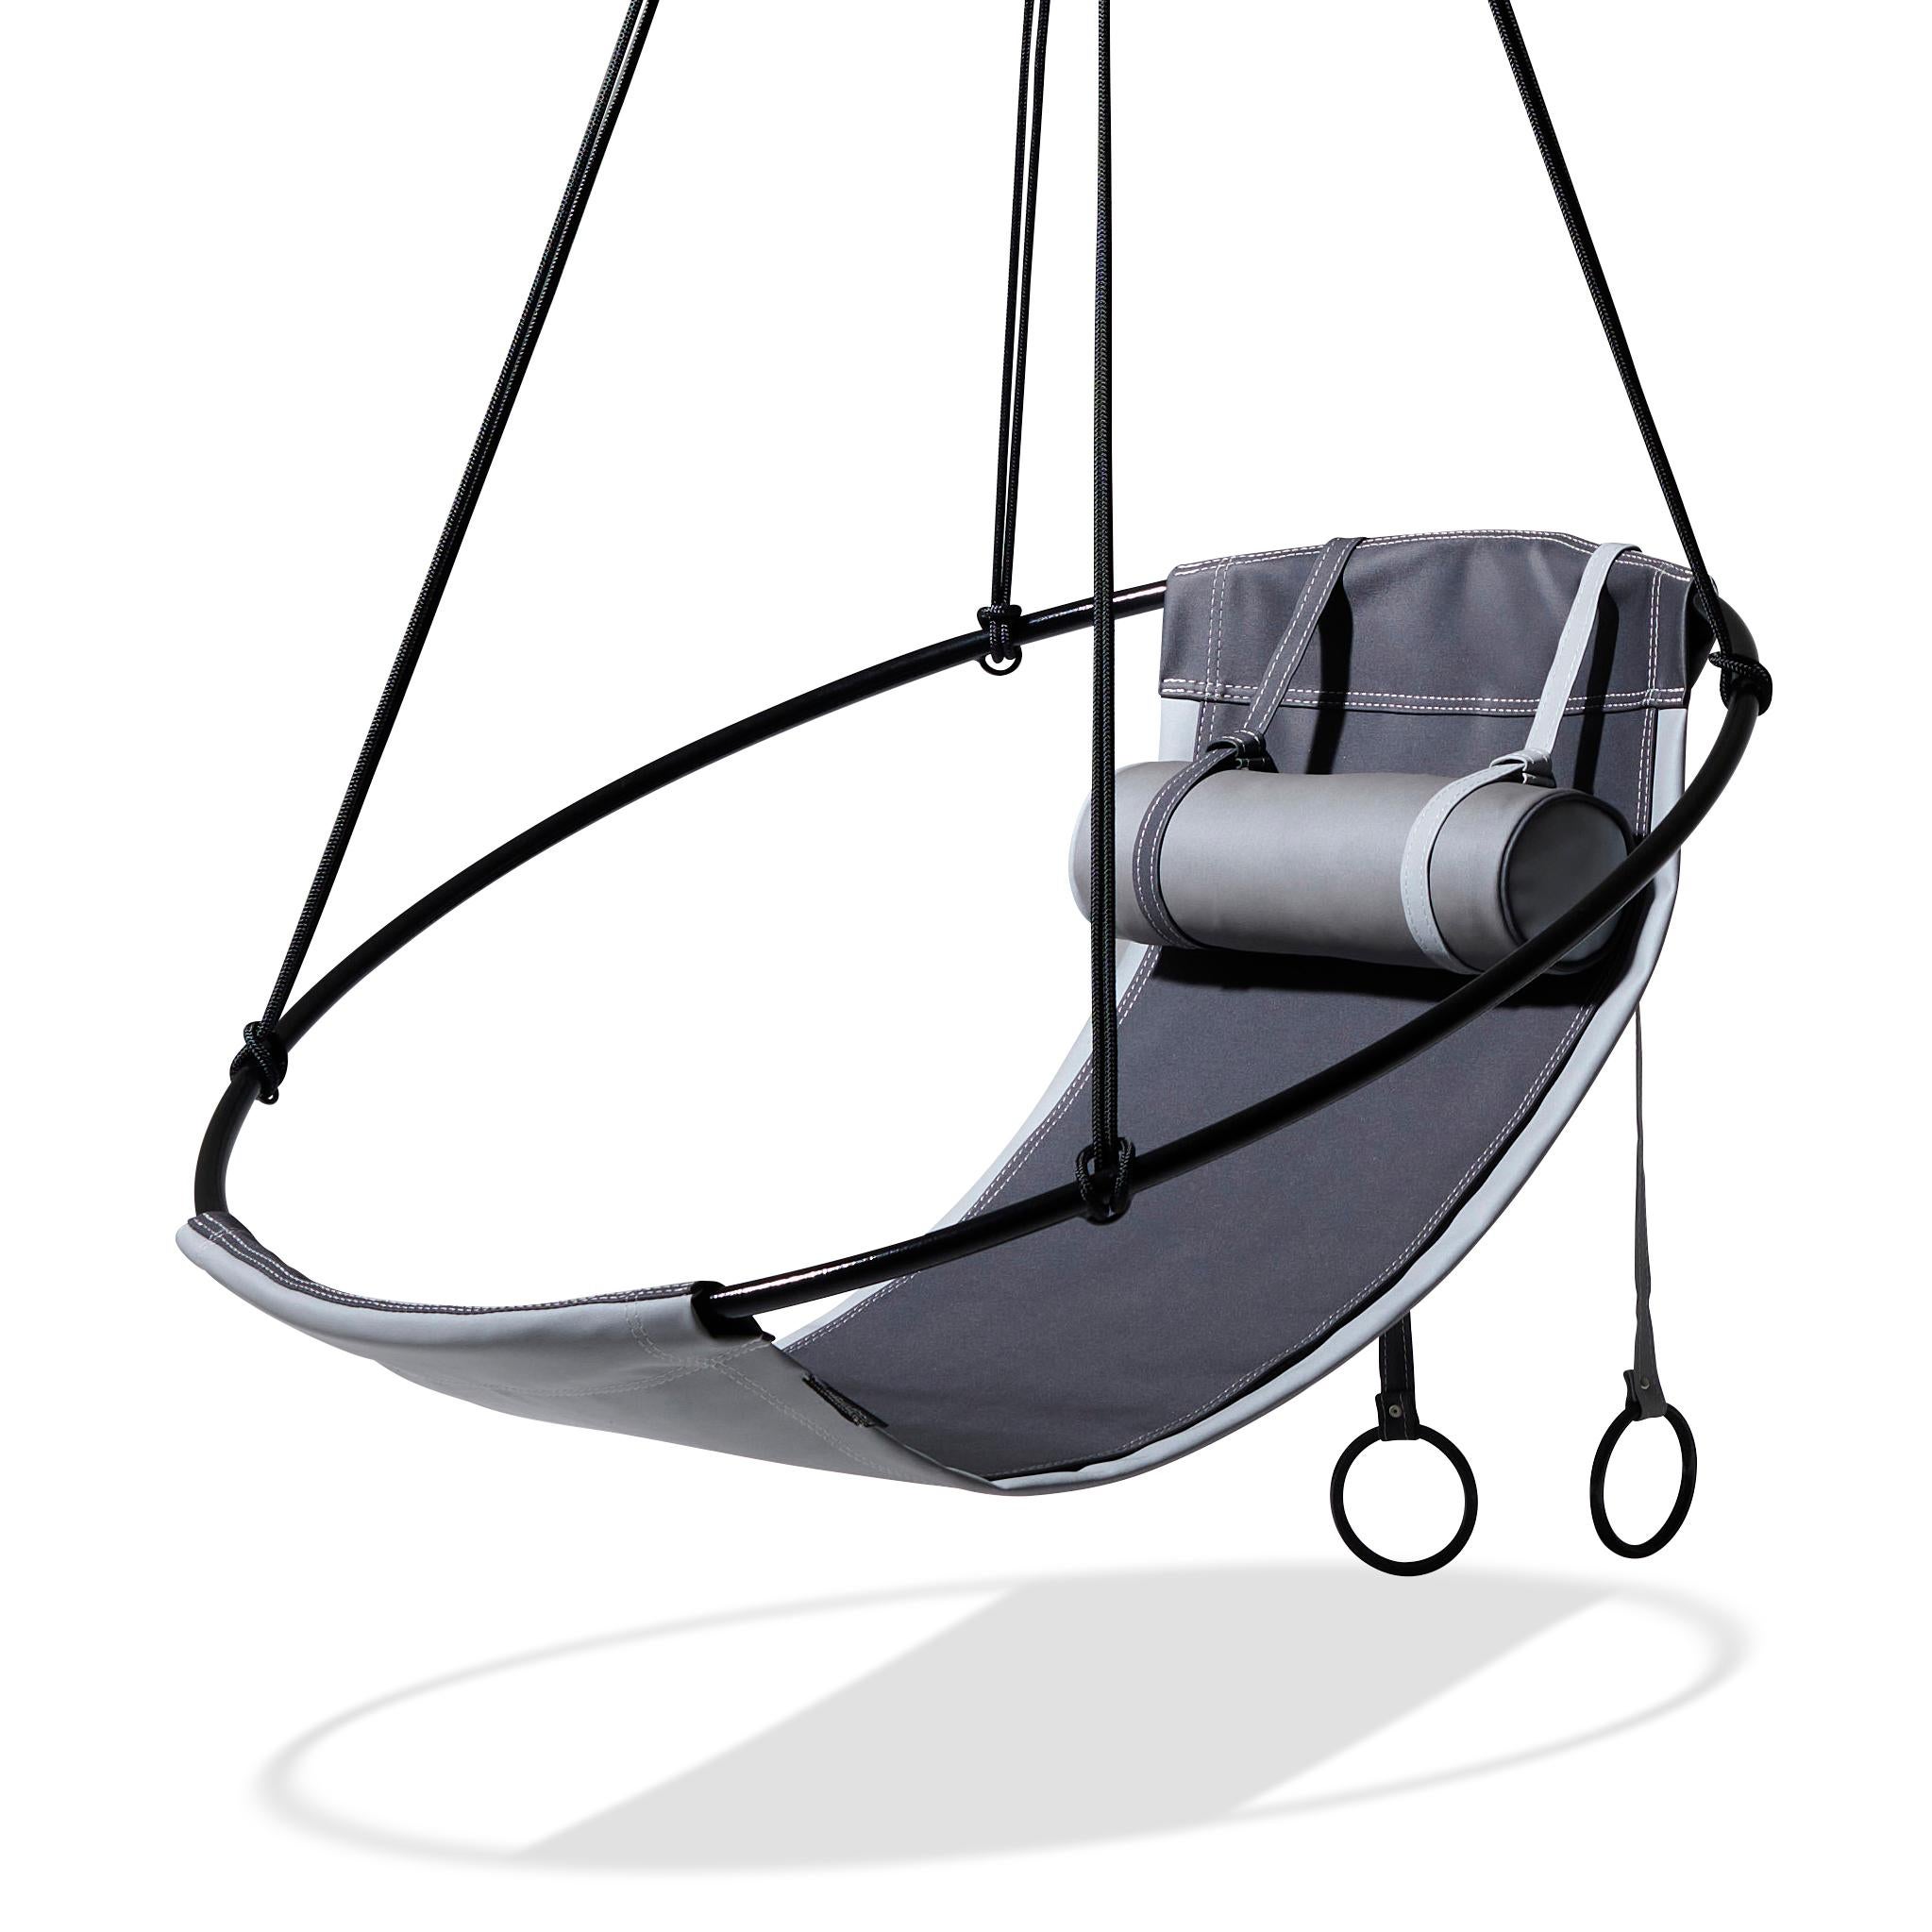 Our outdoor sling hanging chair is crafted with Spradling Silvertex material – a highly sustainable environmentally-friendly vegan material.
The Slings can be ordered as a Single but also works together as a pair which is slightly different from